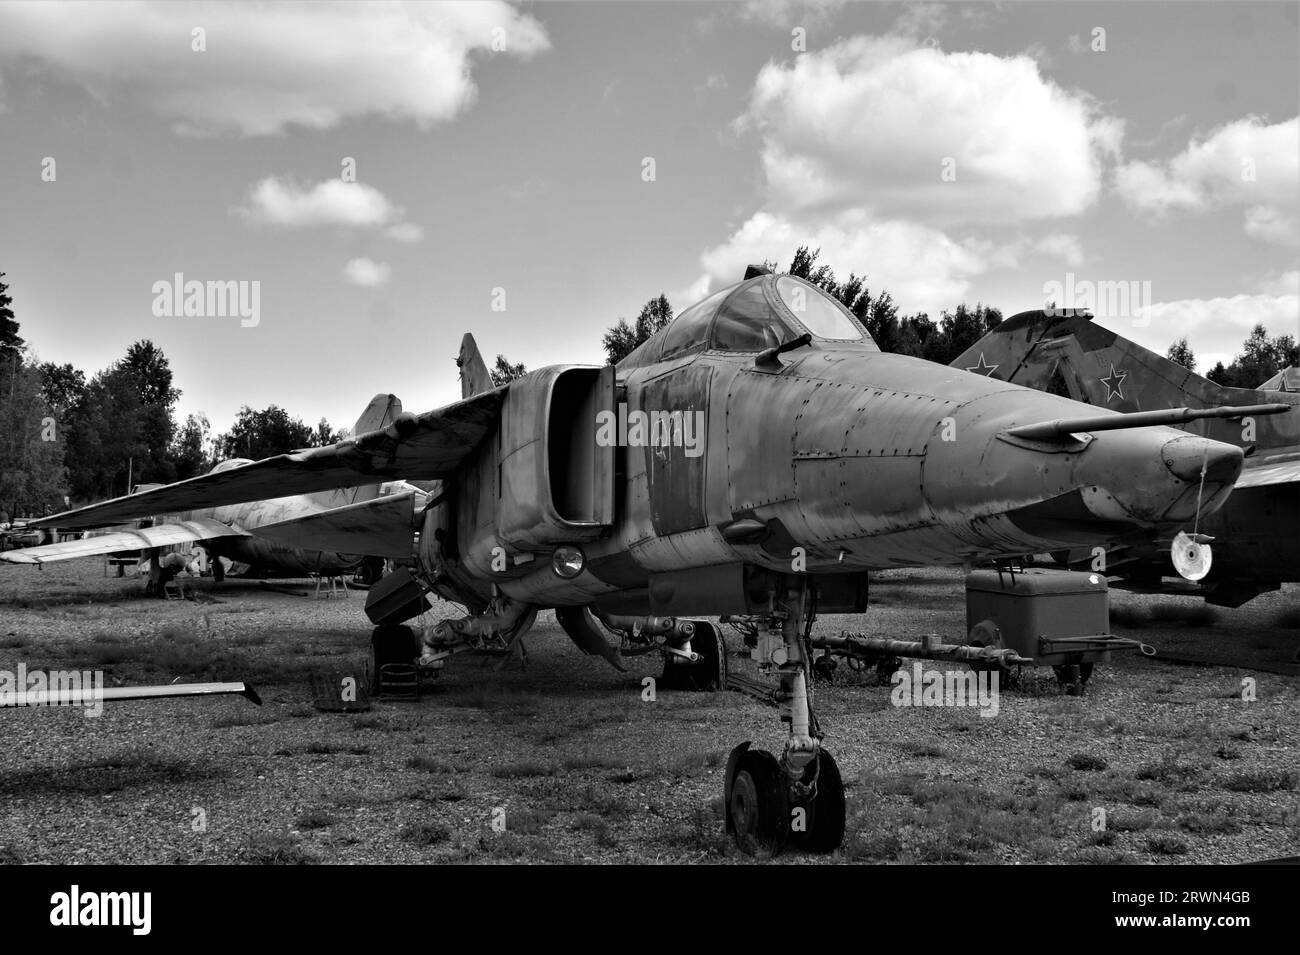 Old Soviet Union military plane. Aviation museum in Latvia. Black and white image. Stock Photo